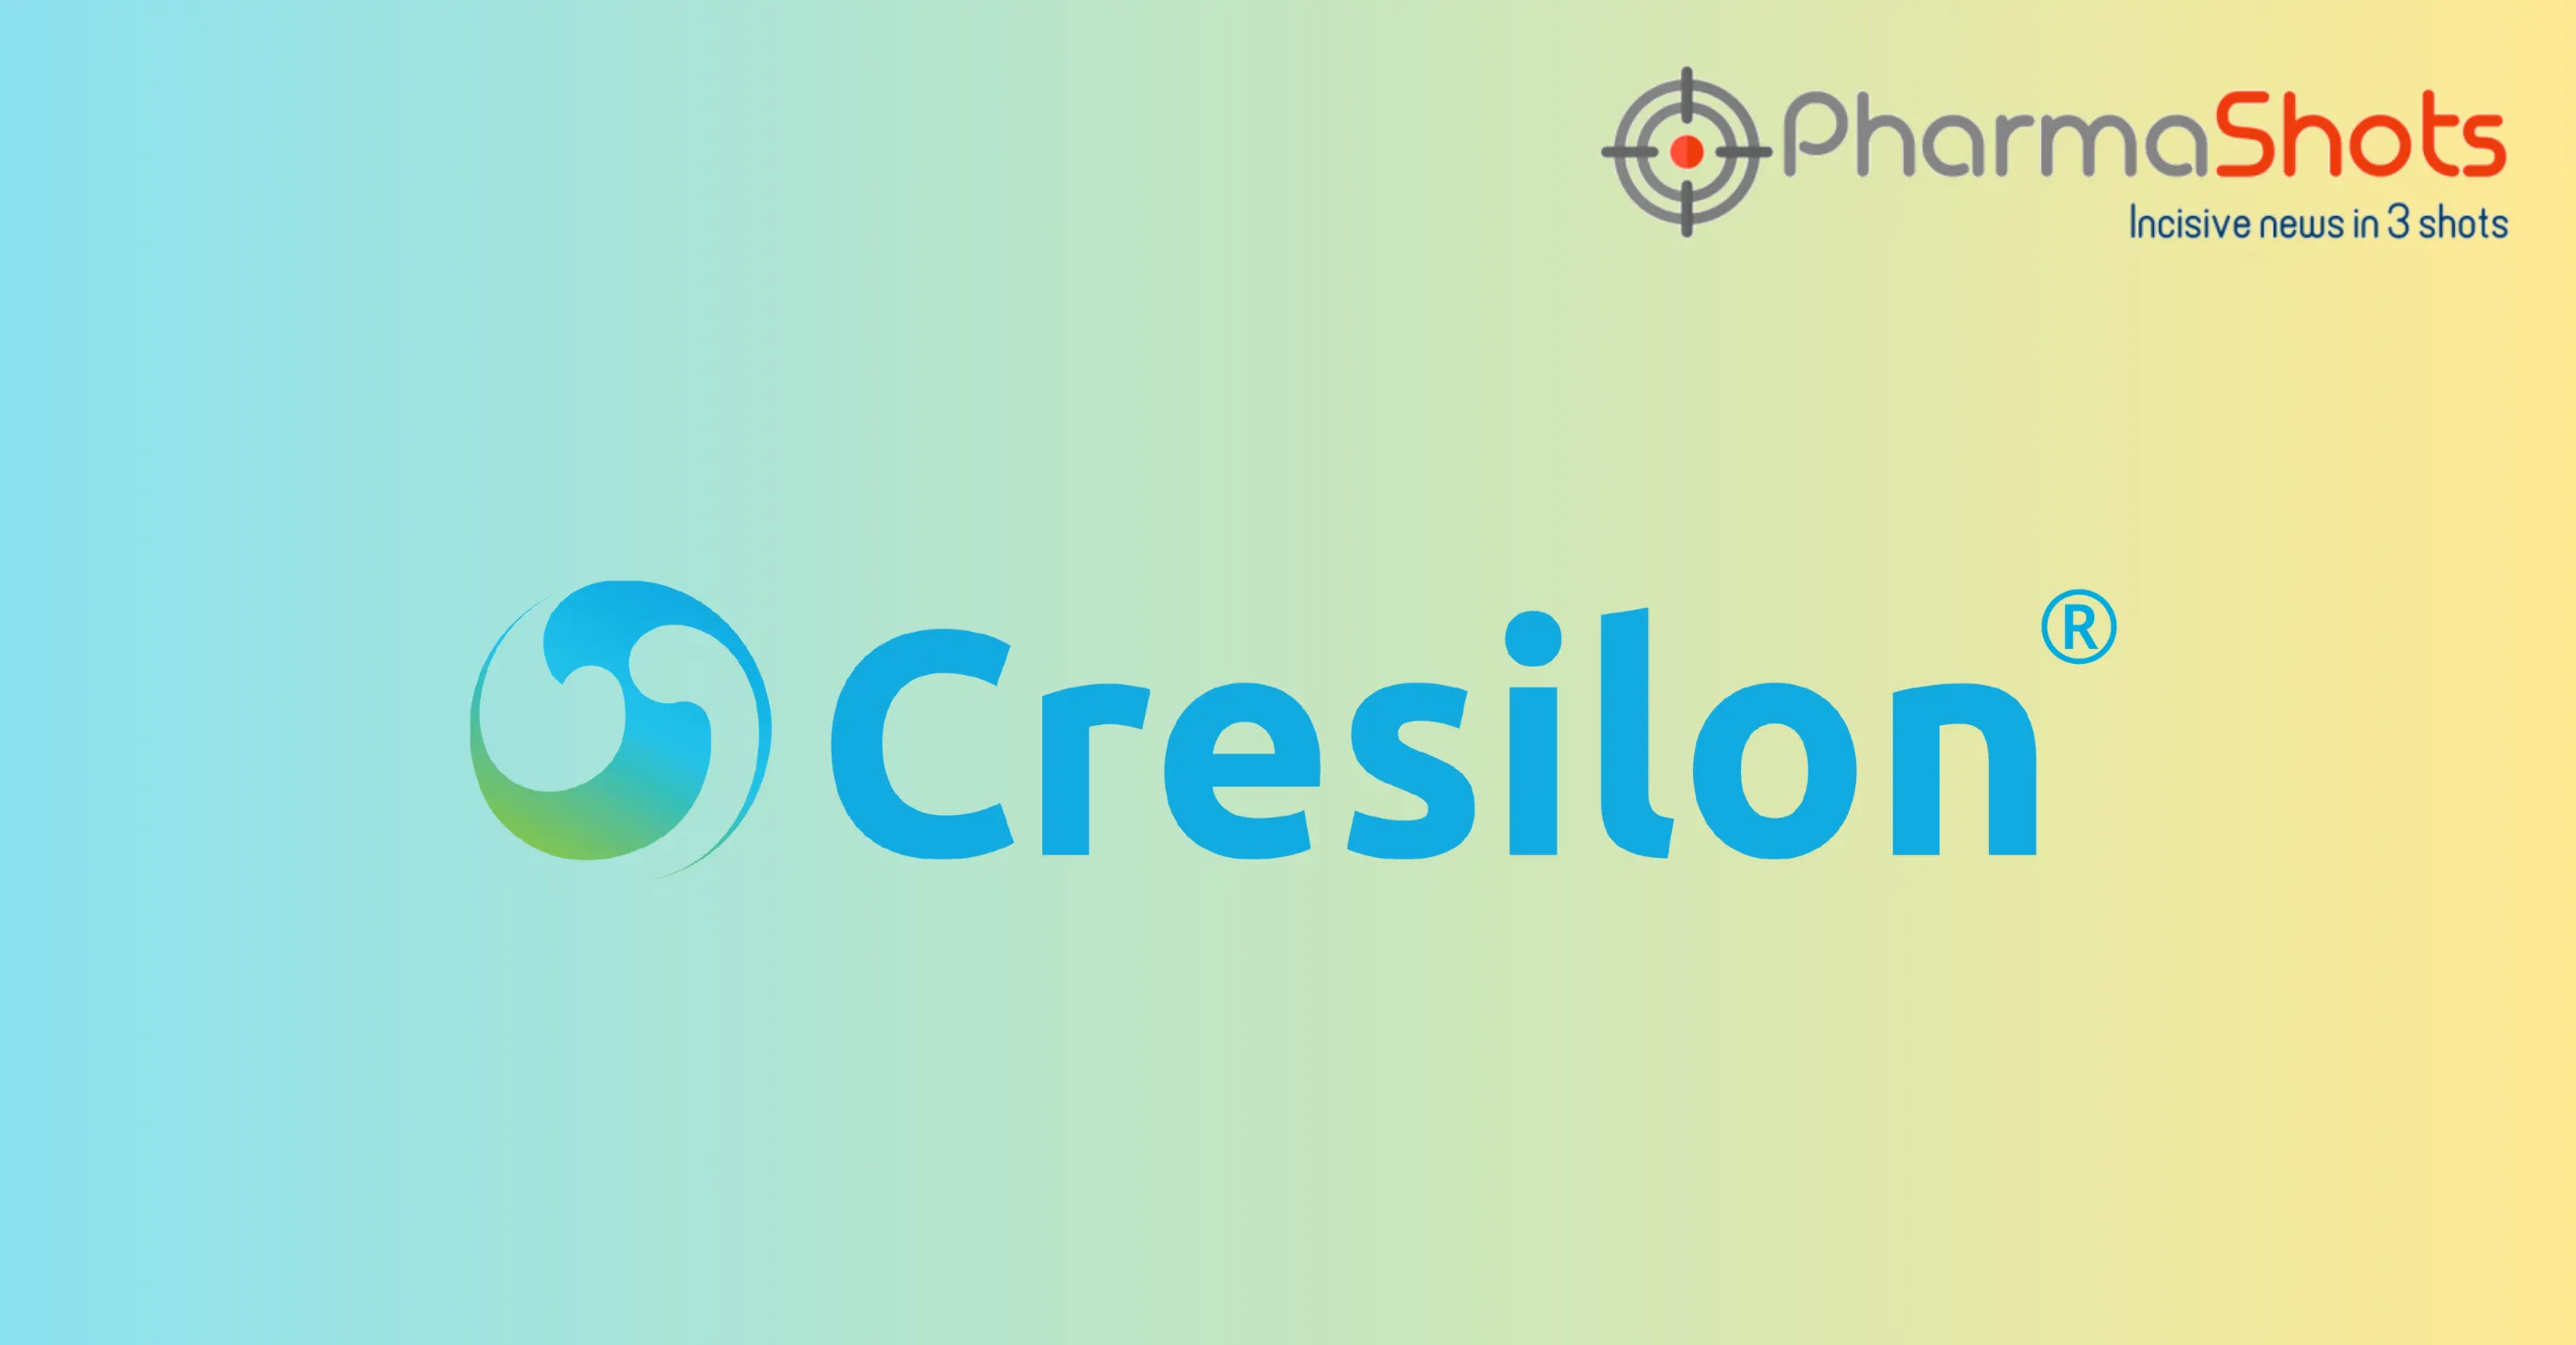 Cresilon Teams Up with Covetrus, MWI Animal Health, and Patterson Veterinary Supply for VETIGEL (Haemostatic Gel)